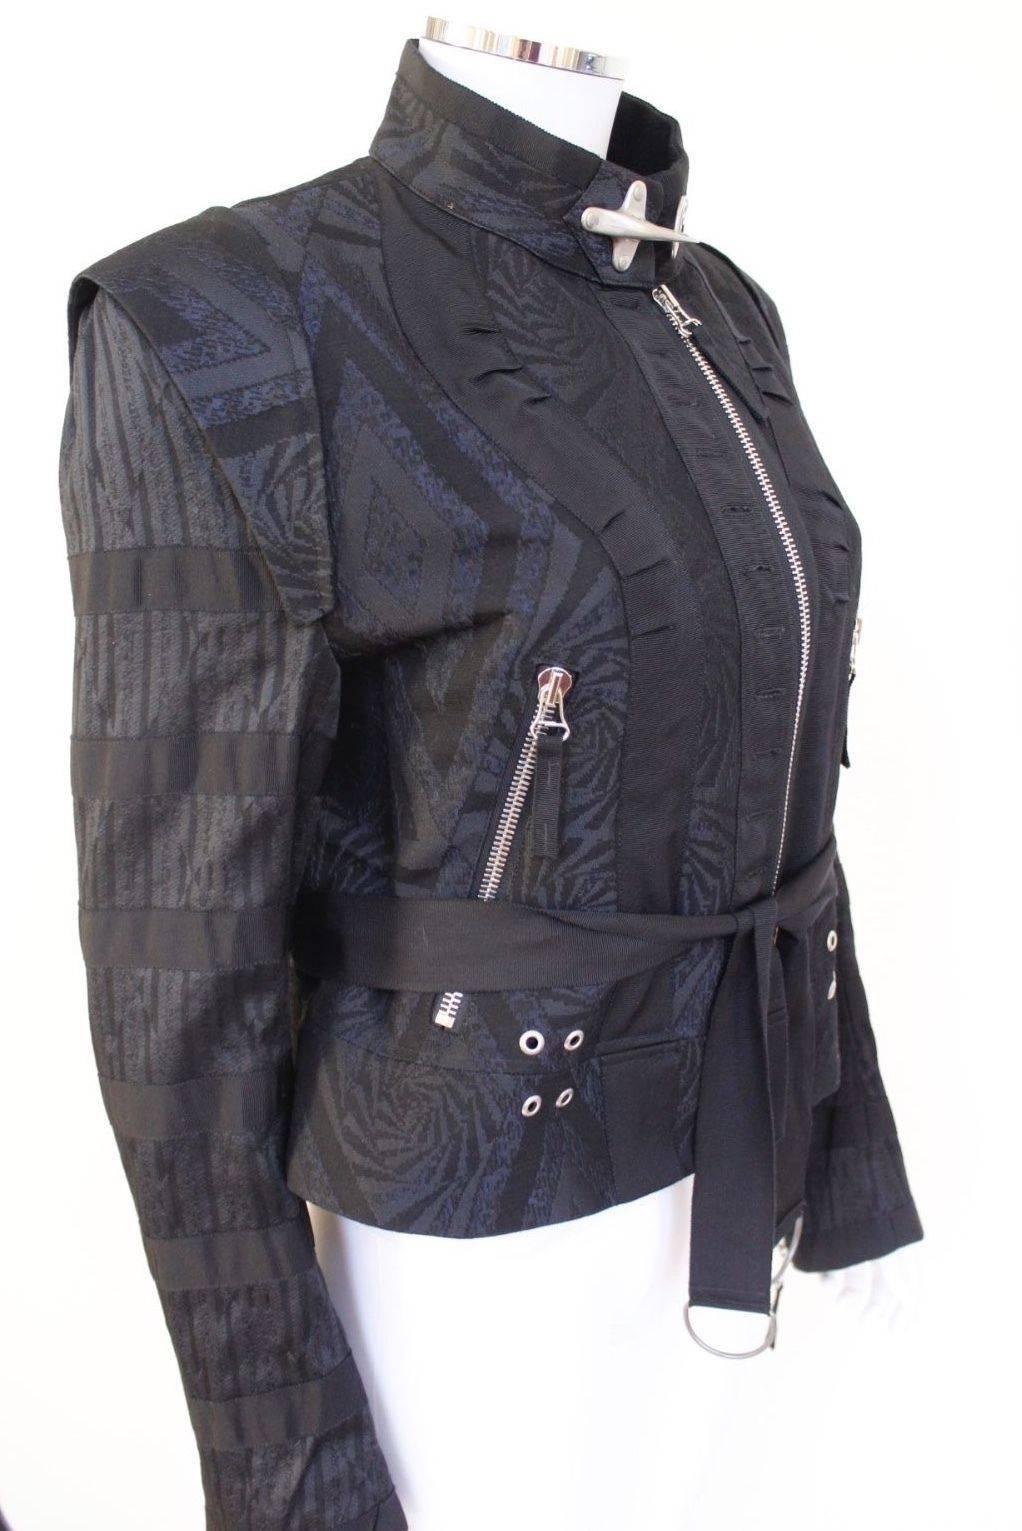 Dries van Noten Black Jacquard Pre Fall 2014 Clasp Jacket 42 uk 14 In New Condition For Sale In London, GB